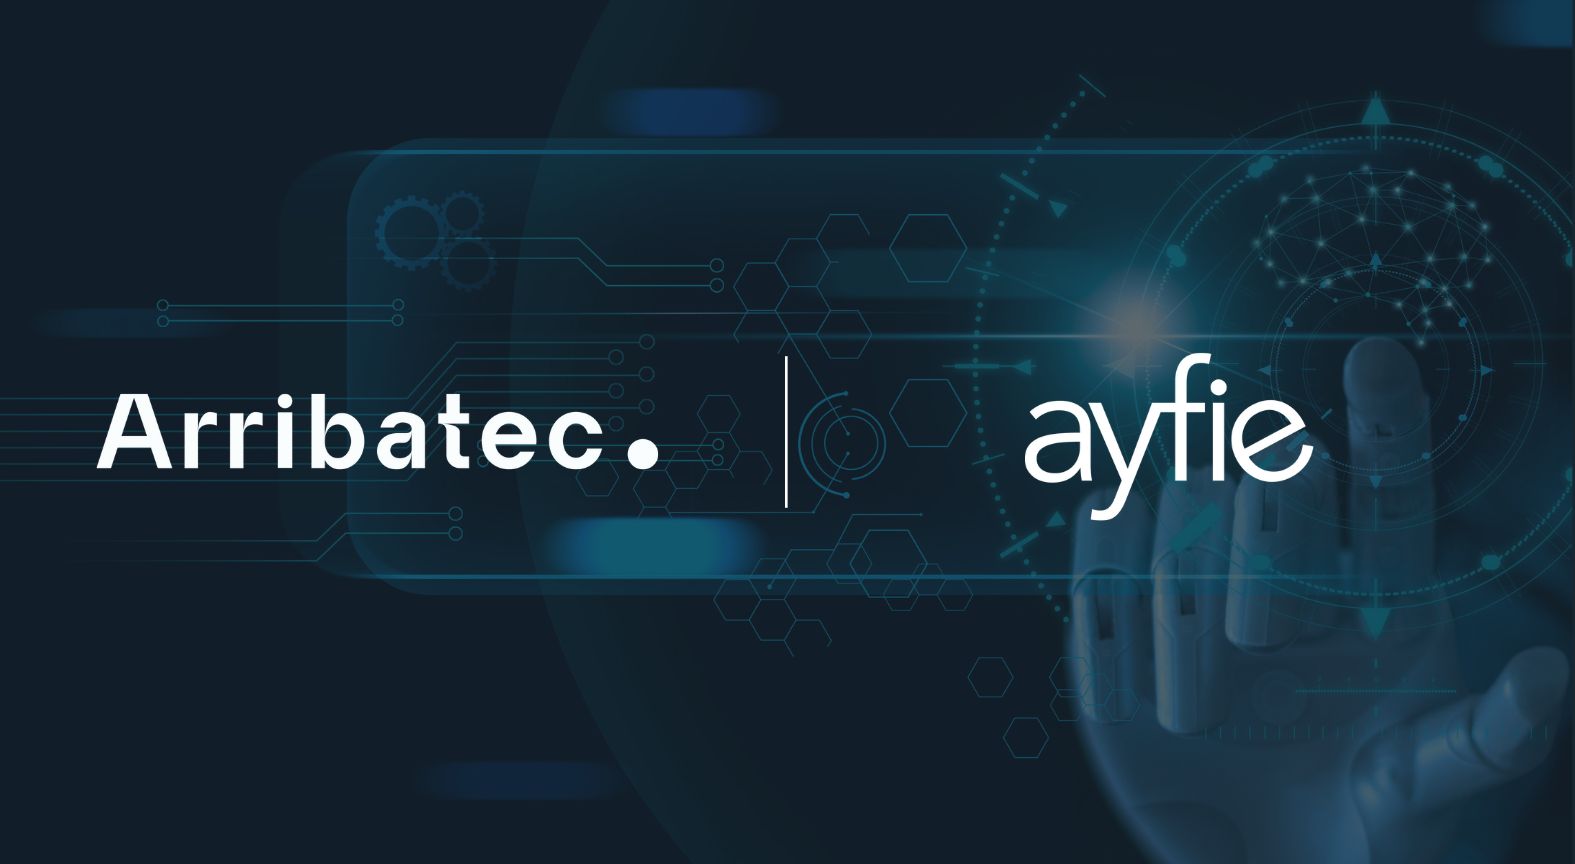 Ayfe and Arribatec redefining search capabilities in enterprise solutions